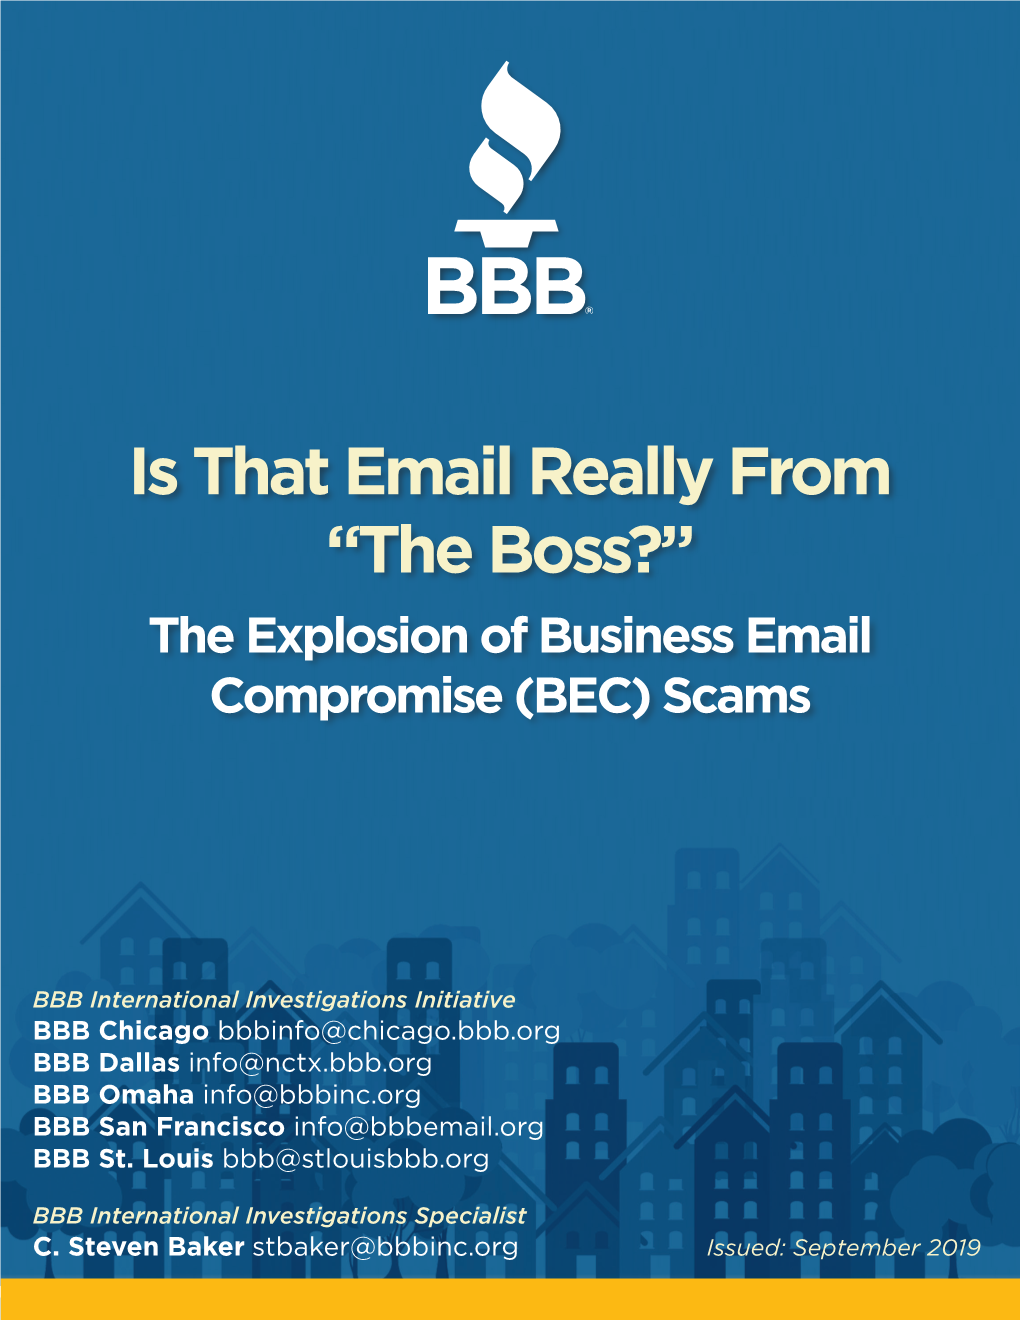 Is That Email Really from “The Boss?” the Explosion of Business Email Compromise (BEC) Scams